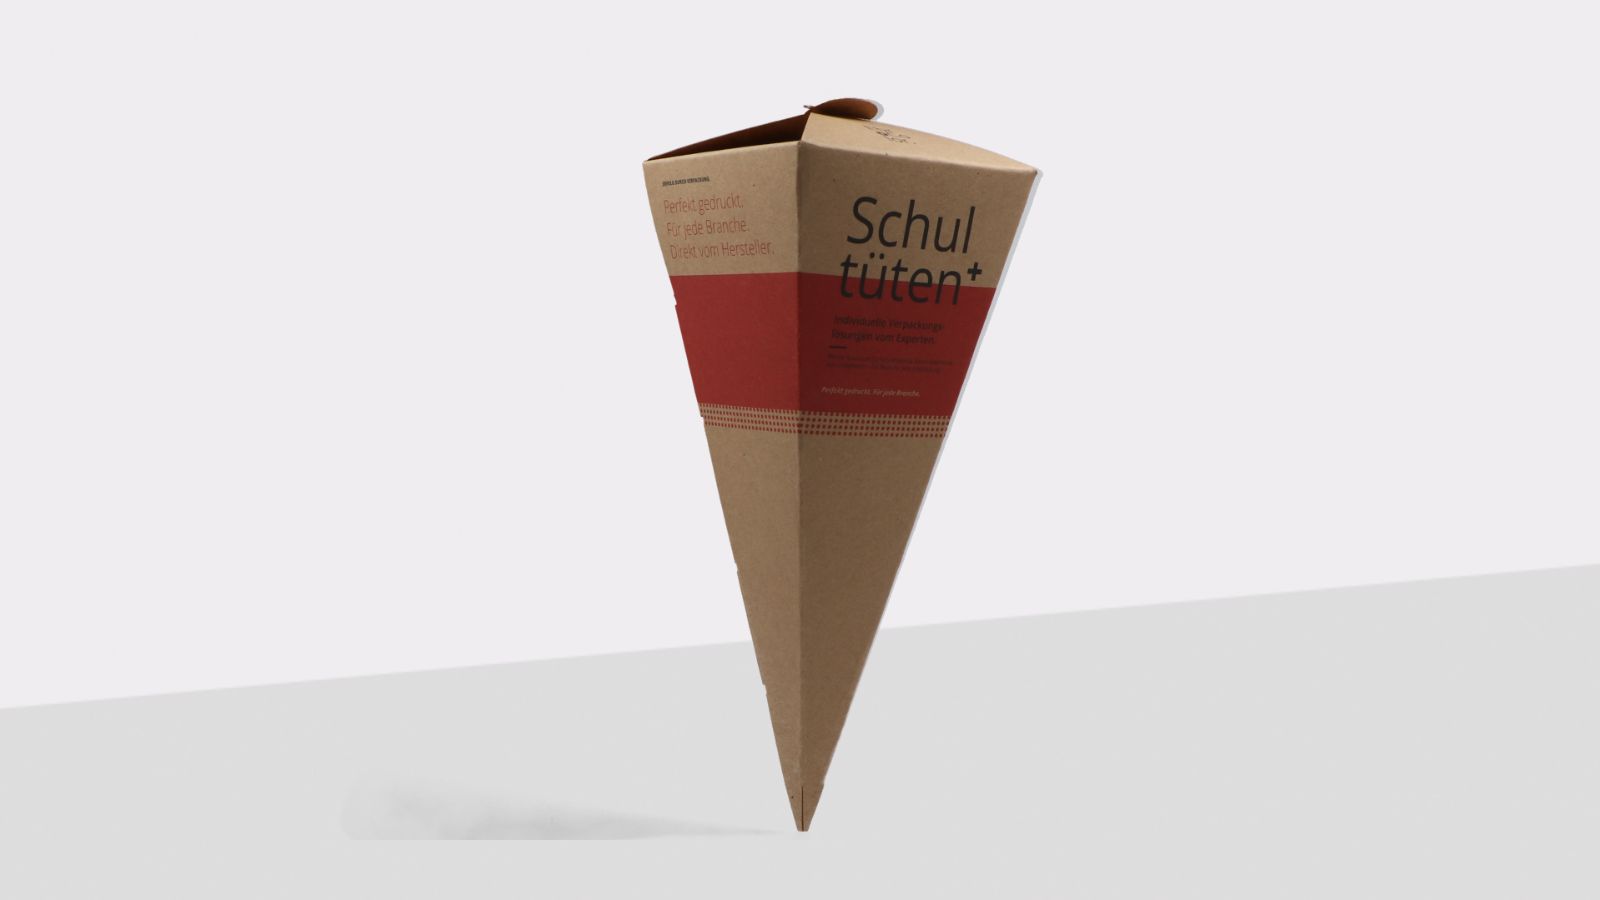 School cones and surprise bags made from brown cardboard